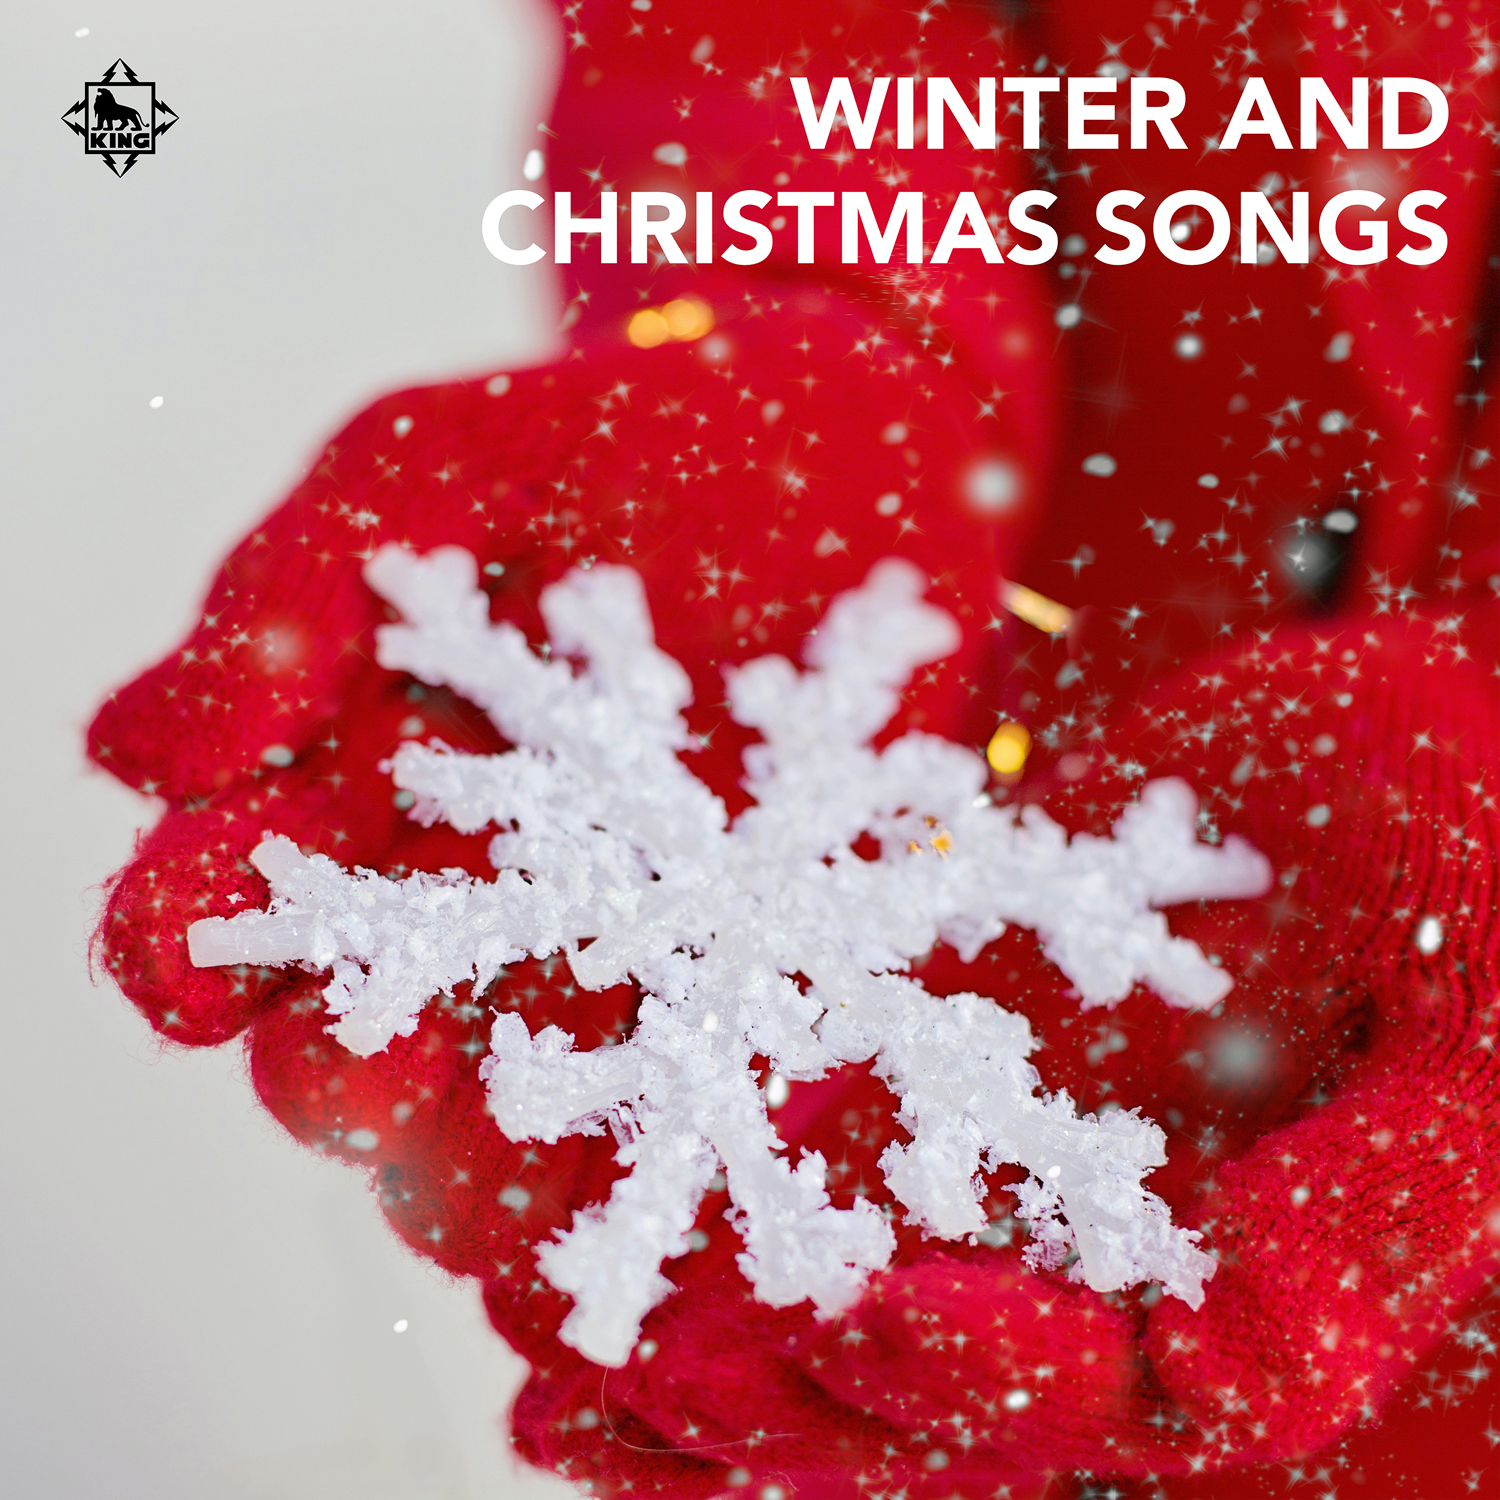 WINTER AND CHRISTMAS SONGS